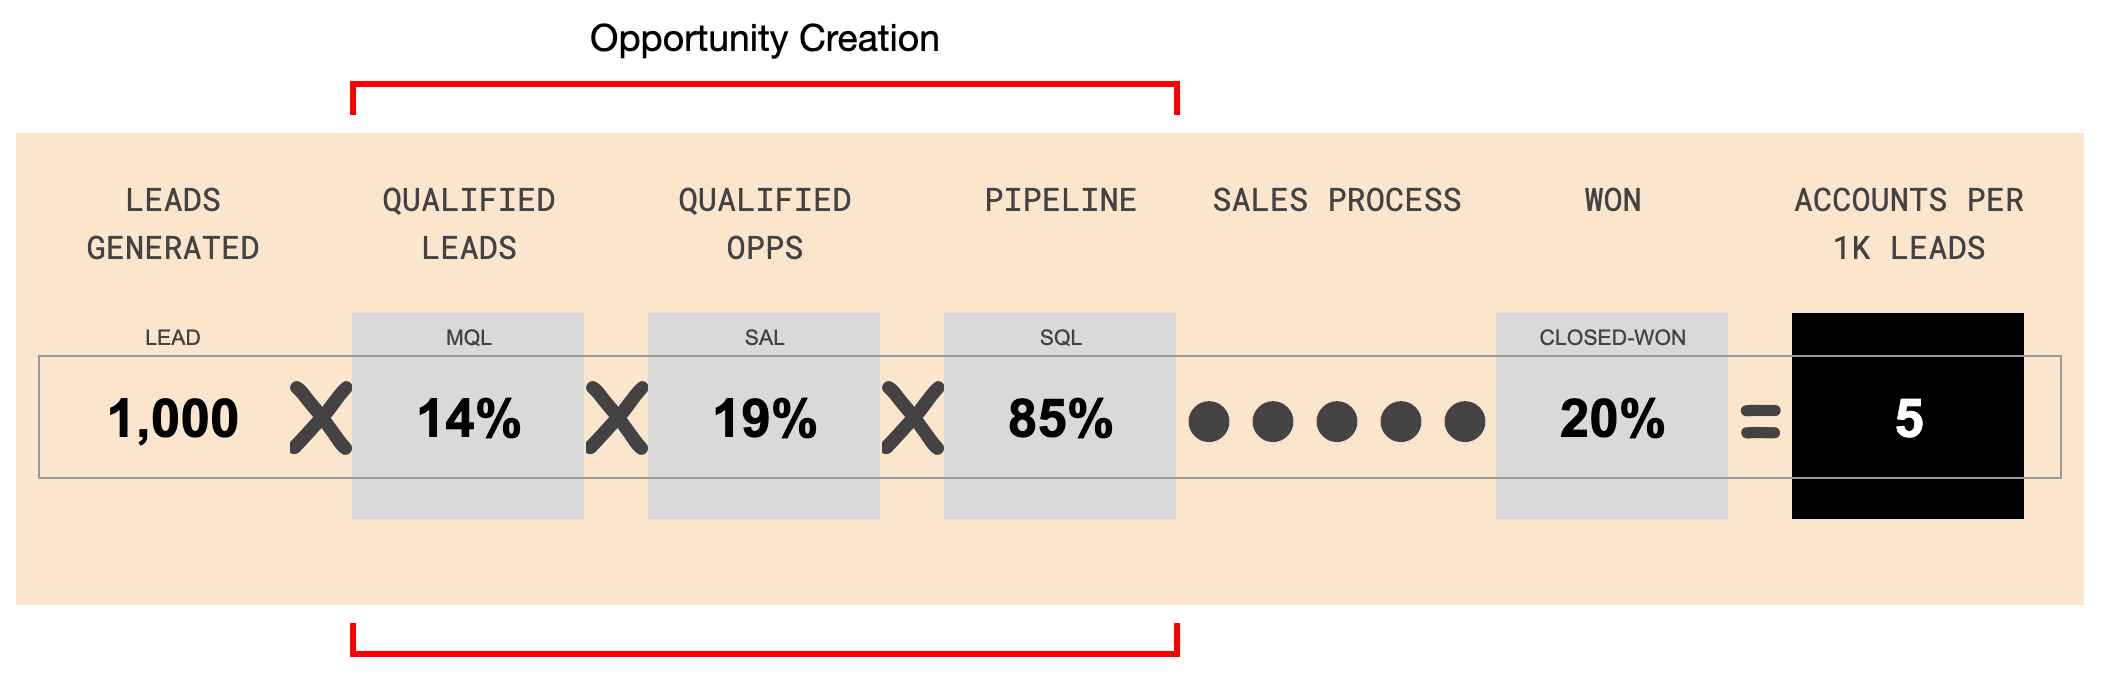 an animation showing opportunity creation and lead growth